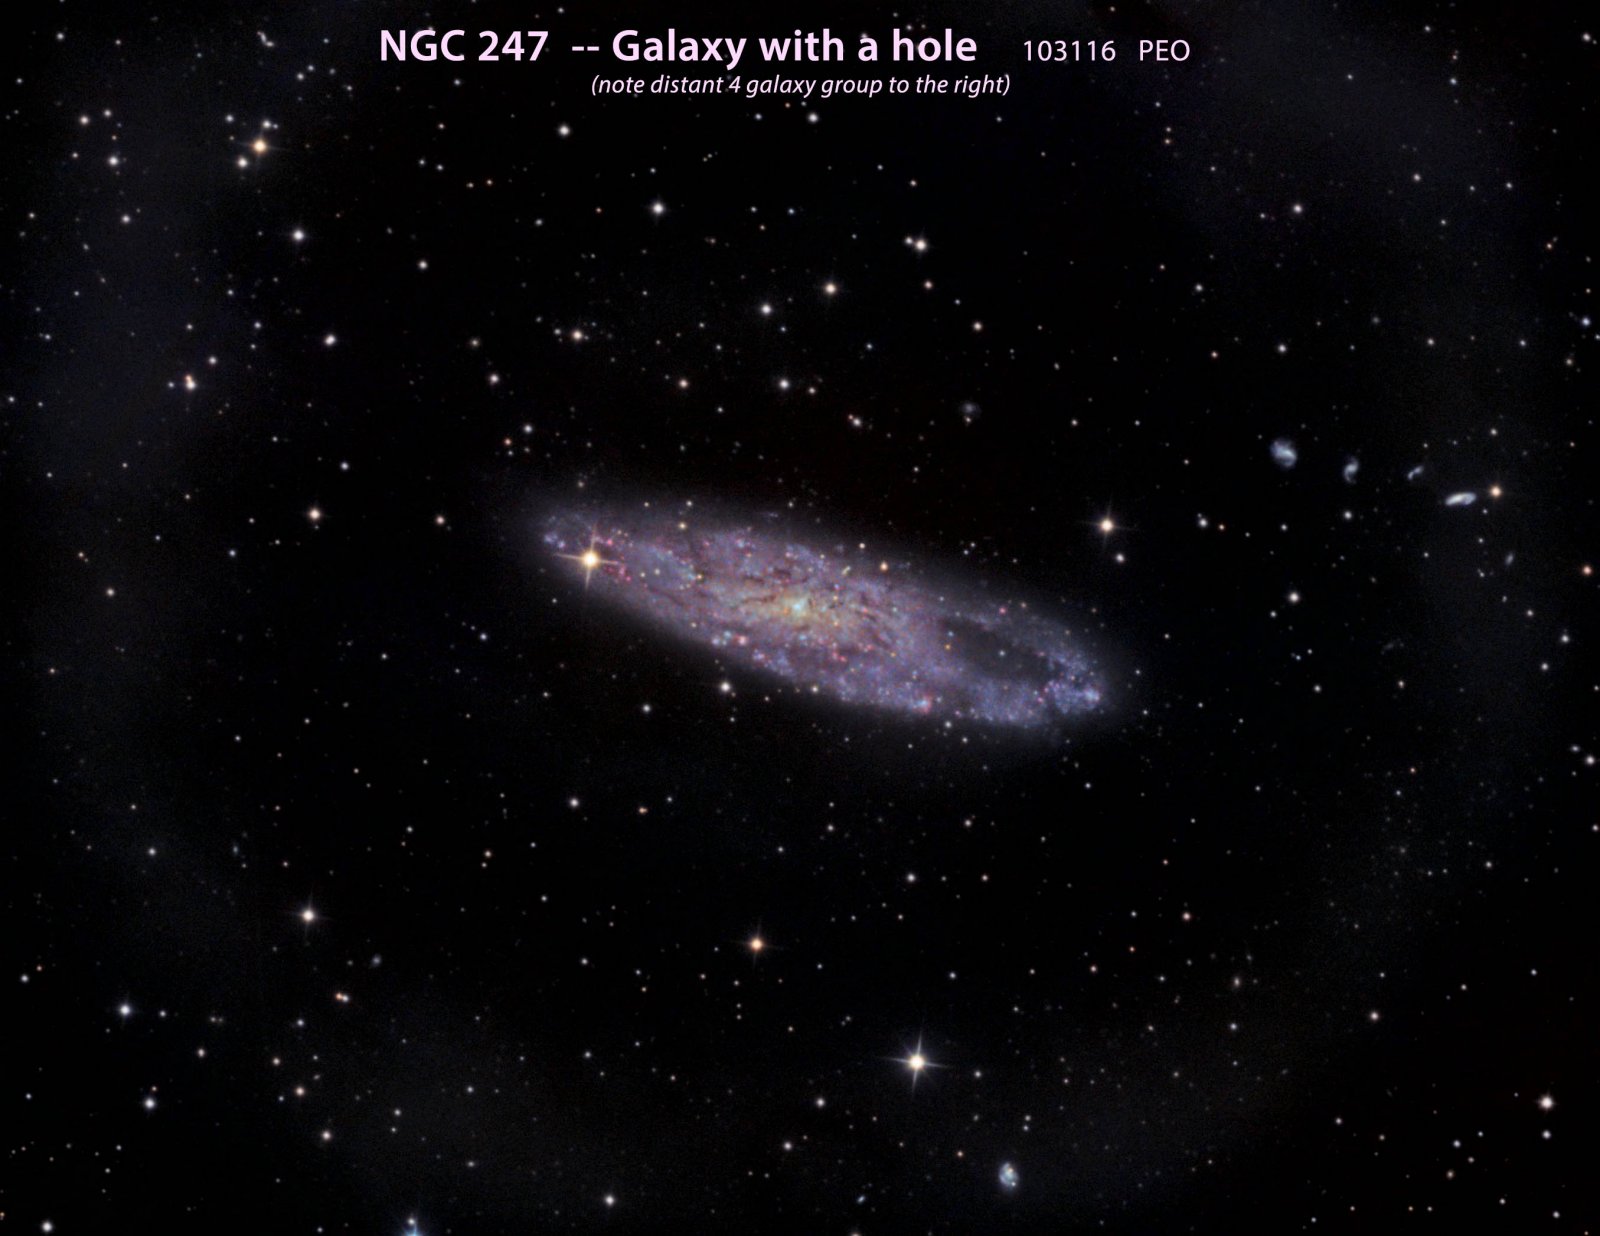 NGC247 and friends